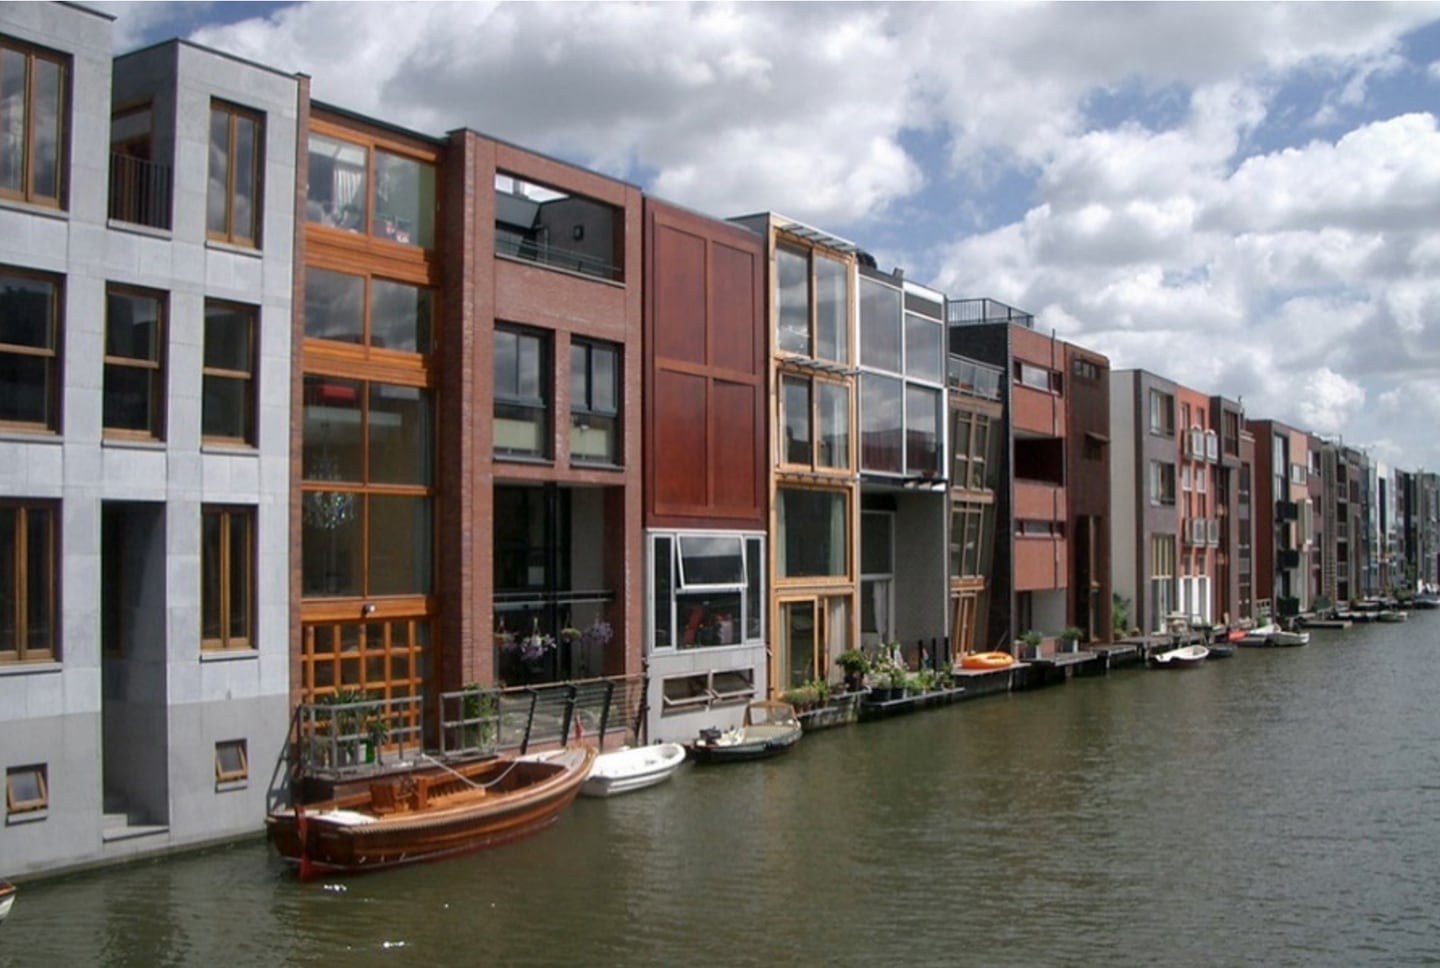 An example of housing in Amsterdam, Netherlands where the density is 100 dwellings per hectare